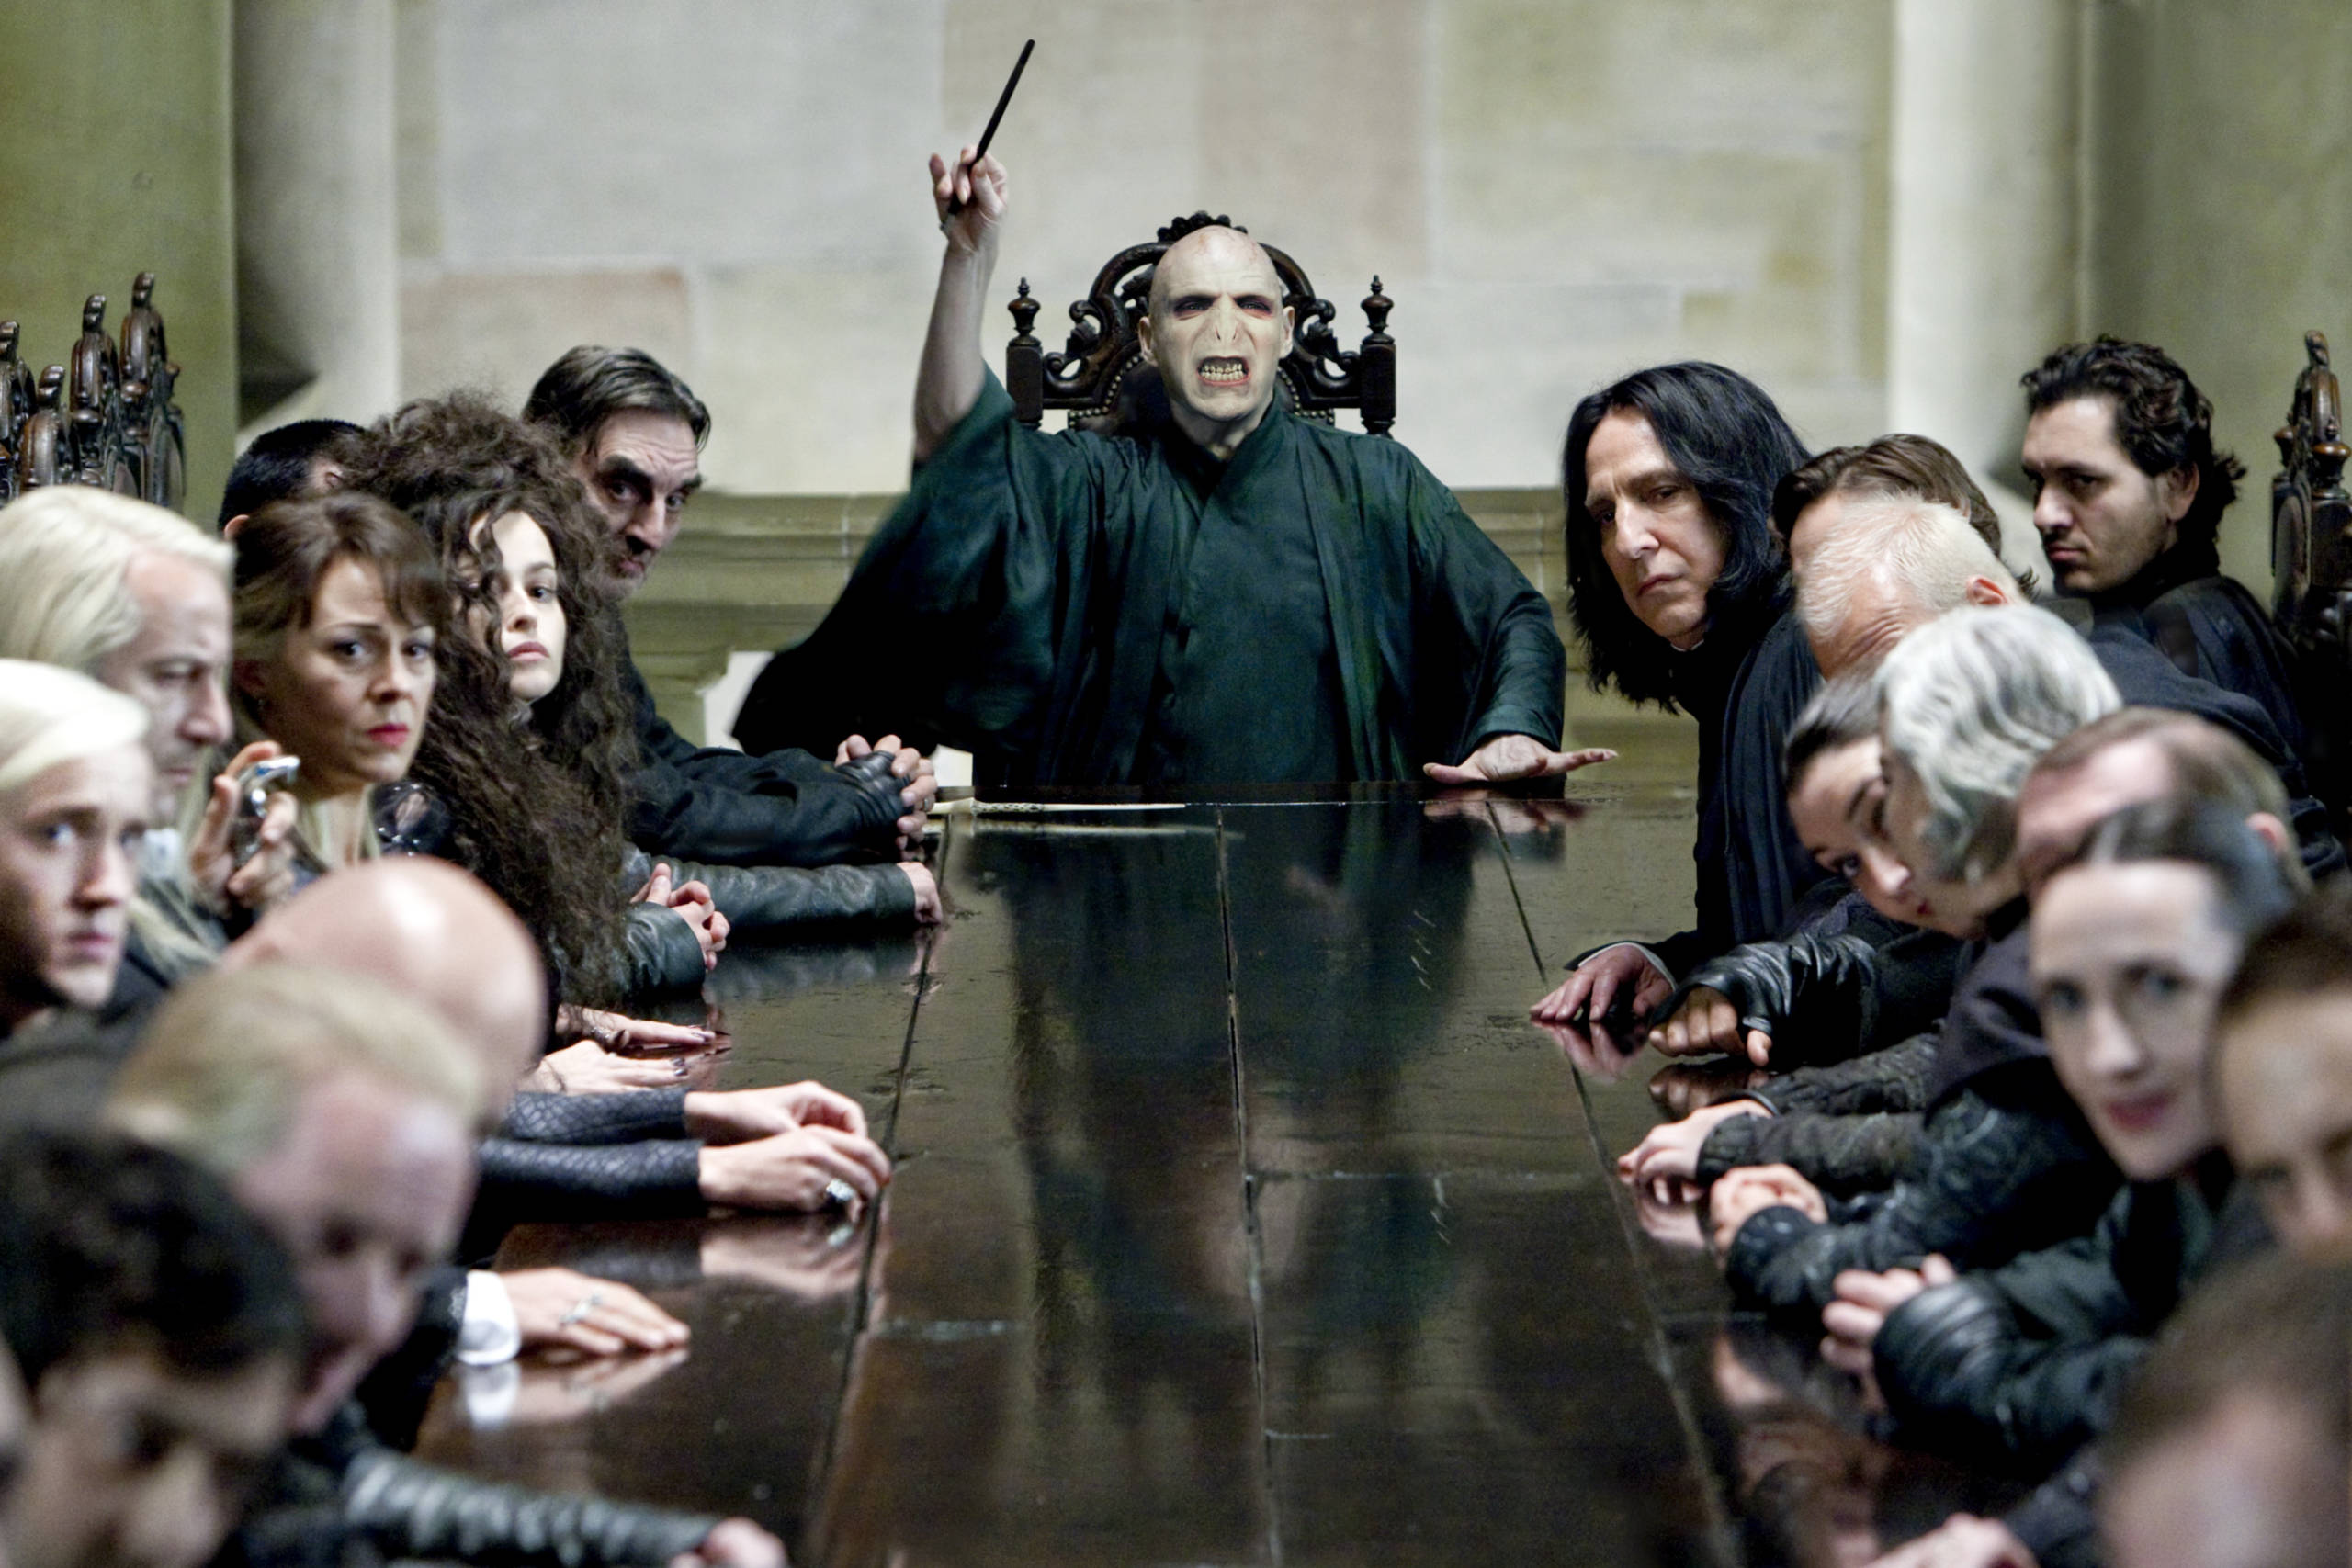 Voldemort casts a spell in front of his Death Eaters at Malfoy Manor in a film still from The Deathly Hallows Part 1 